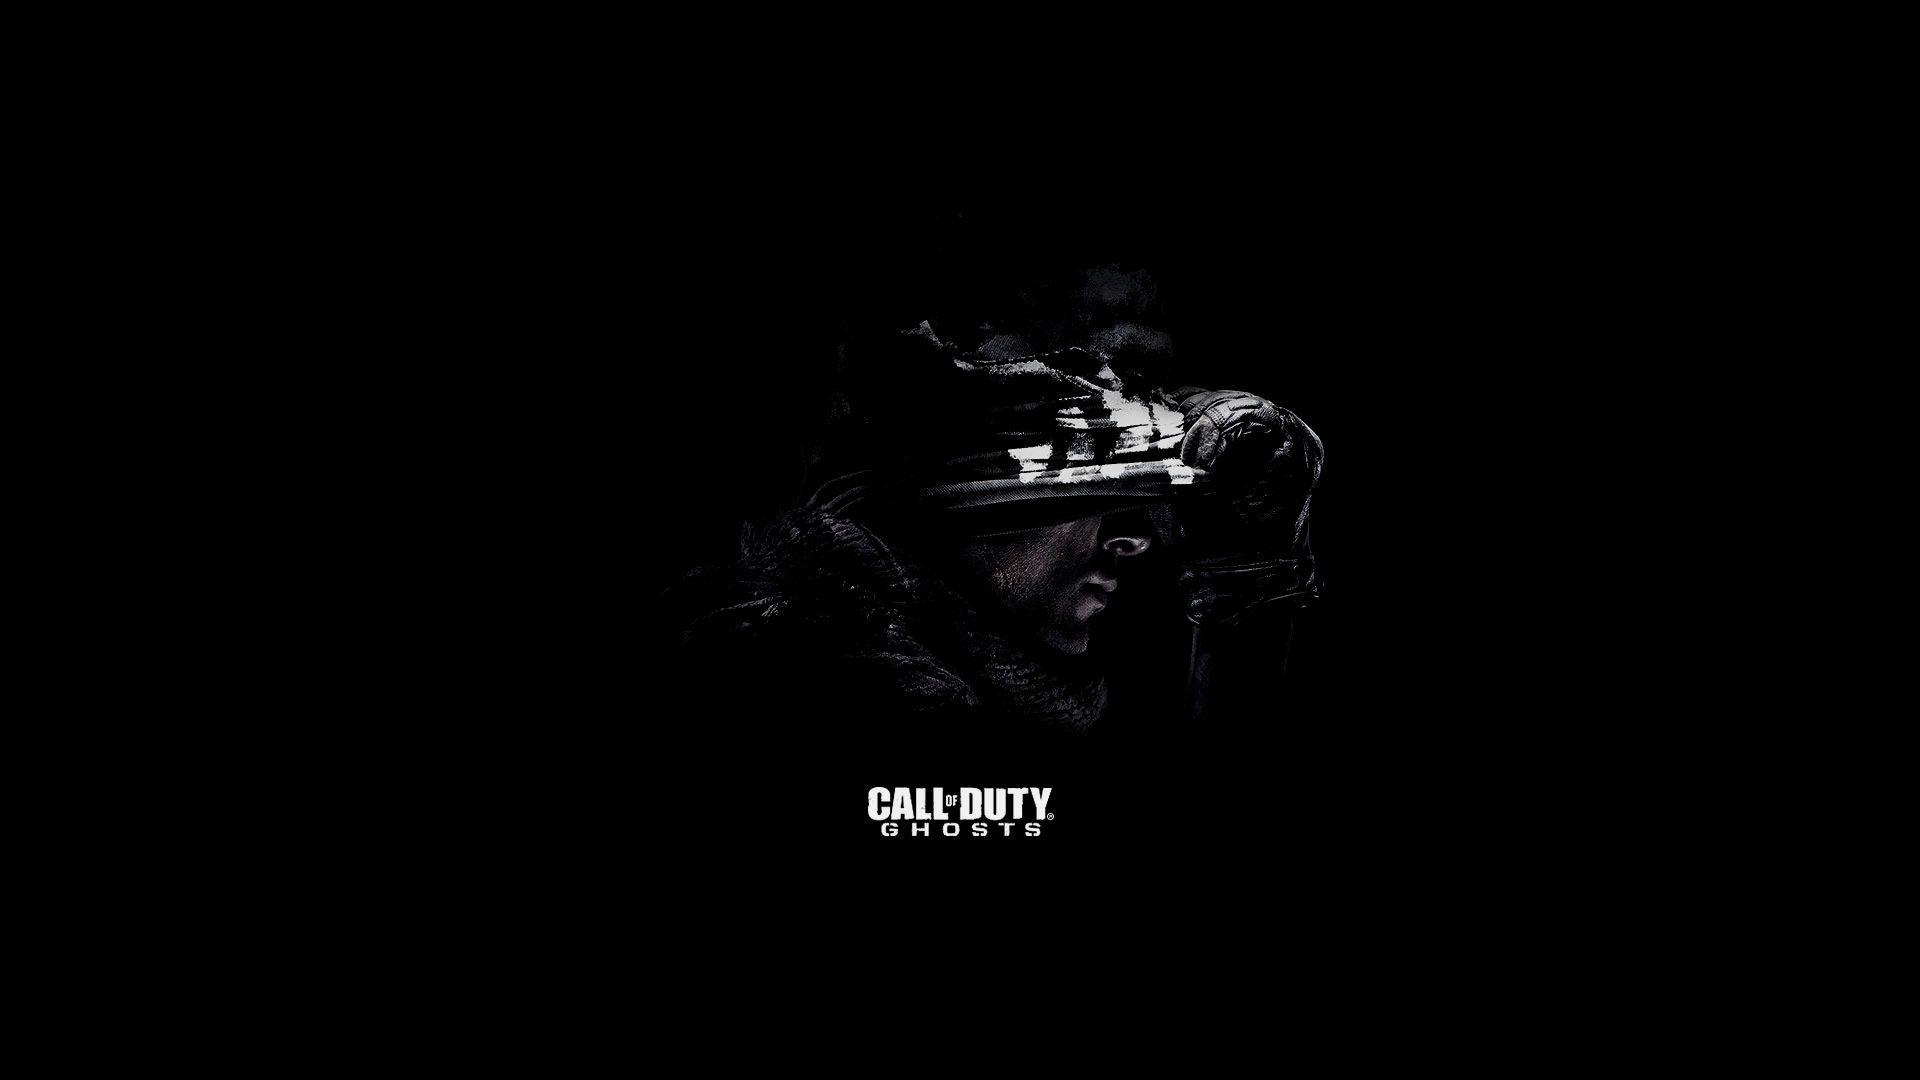 Call Of Duty Ghosts Wallpaper 1080p. Game Wallpaper